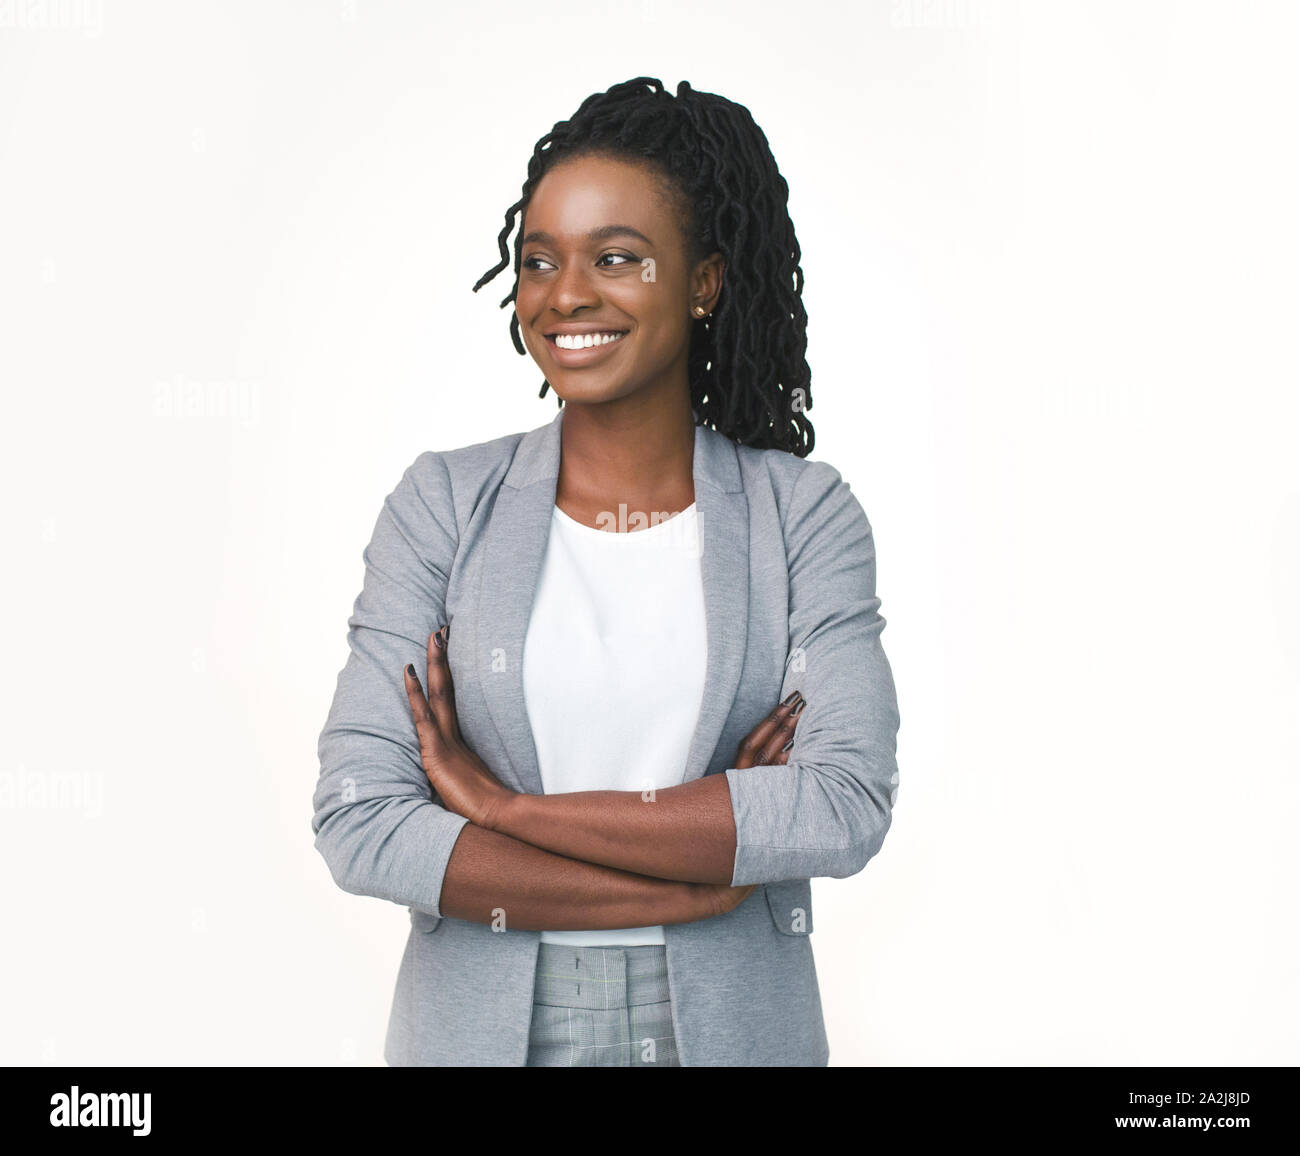 Positive Black Business Lady Posing Crossing Hands Over White Background Stock Photo